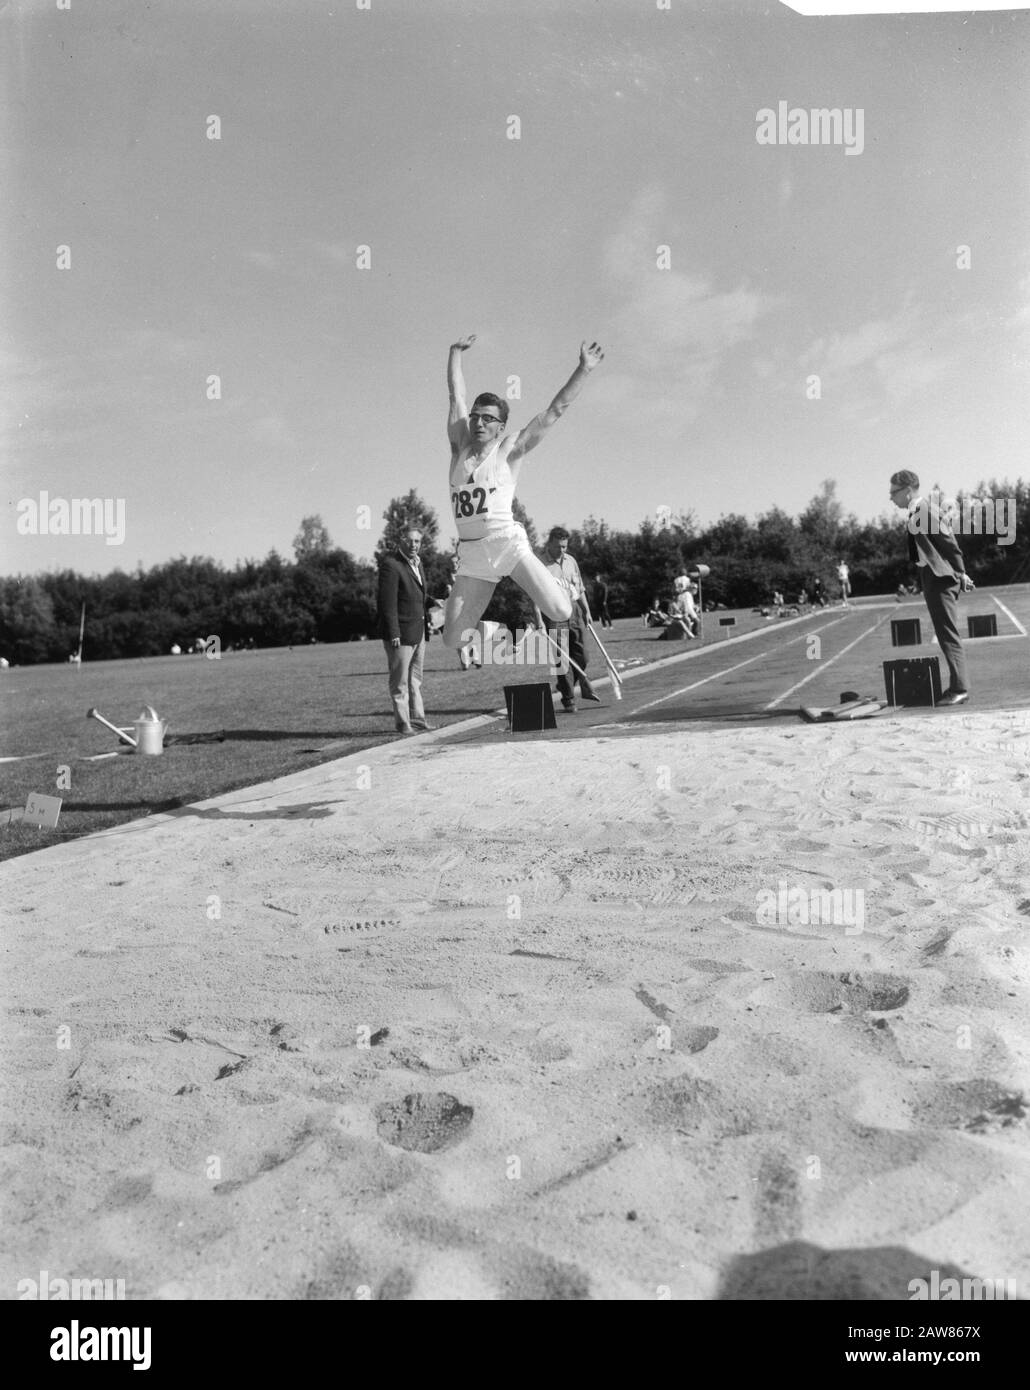 Dutch athletics championships in Groningen, J. Kant in action jump Date: August 14, 1965 Location: Groningen Keywords: athletics championships Person Name: J. Kant Stock Photo